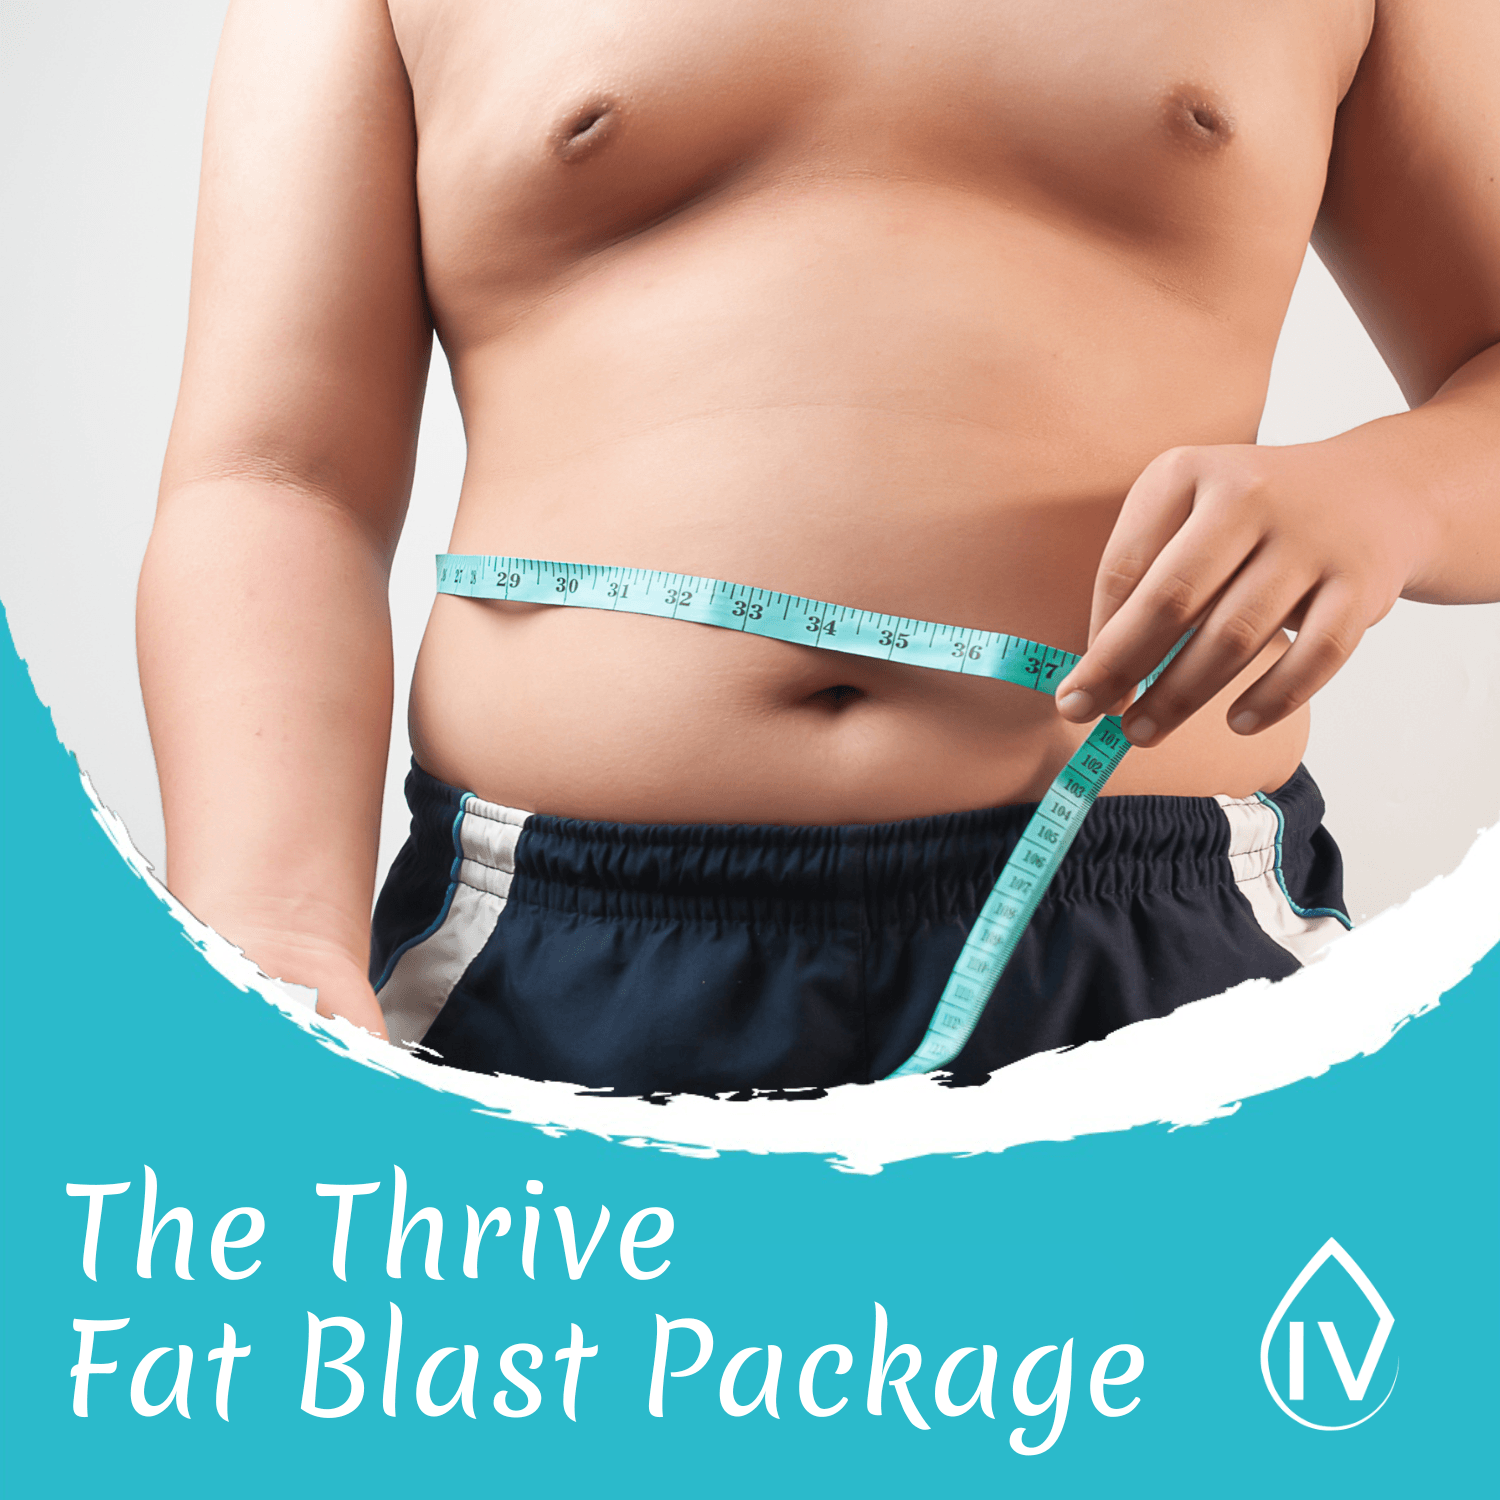 The Thrive Fat Blast Package